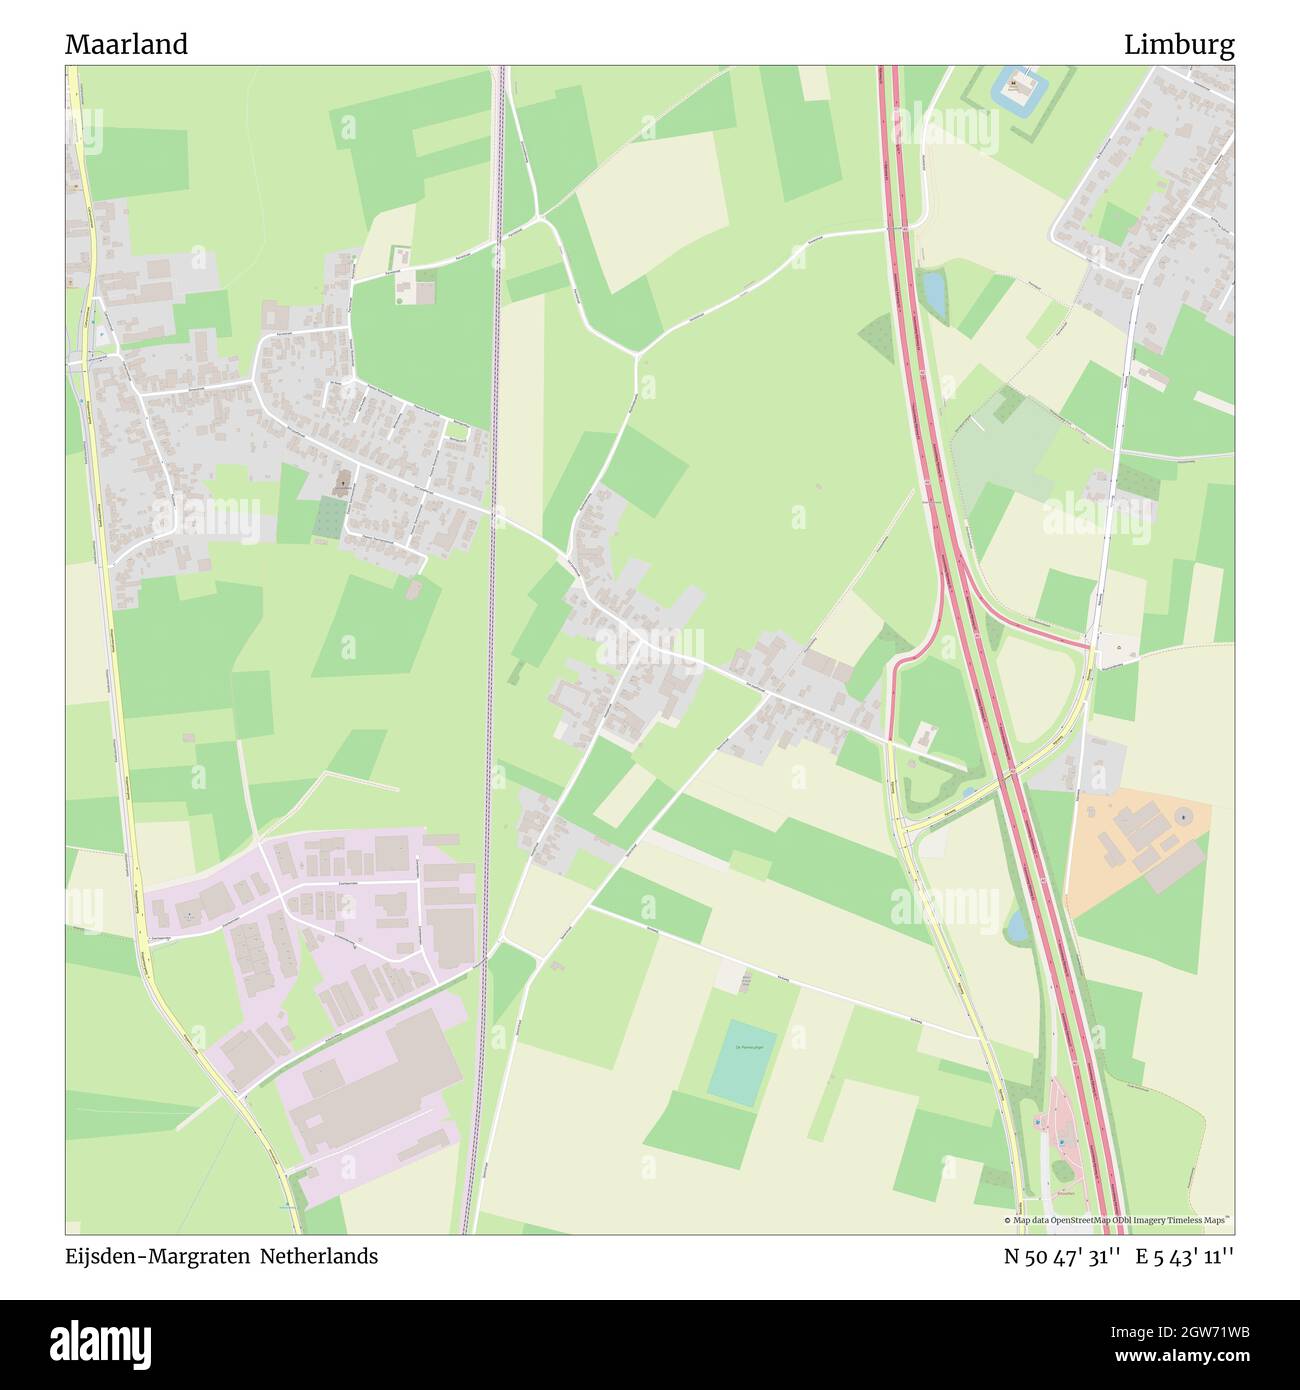 Maarland, Eijsden-Margraten, Netherlands, Limburg, N 50 47' 31'', E 5 43' 11'', map, Timeless Map published in 2021. Travelers, explorers and adventurers like Florence Nightingale, David Livingstone, Ernest Shackleton, Lewis and Clark and Sherlock Holmes relied on maps to plan travels to the world's most remote corners, Timeless Maps is mapping most locations on the globe, showing the achievement of great dreams Stock Photo